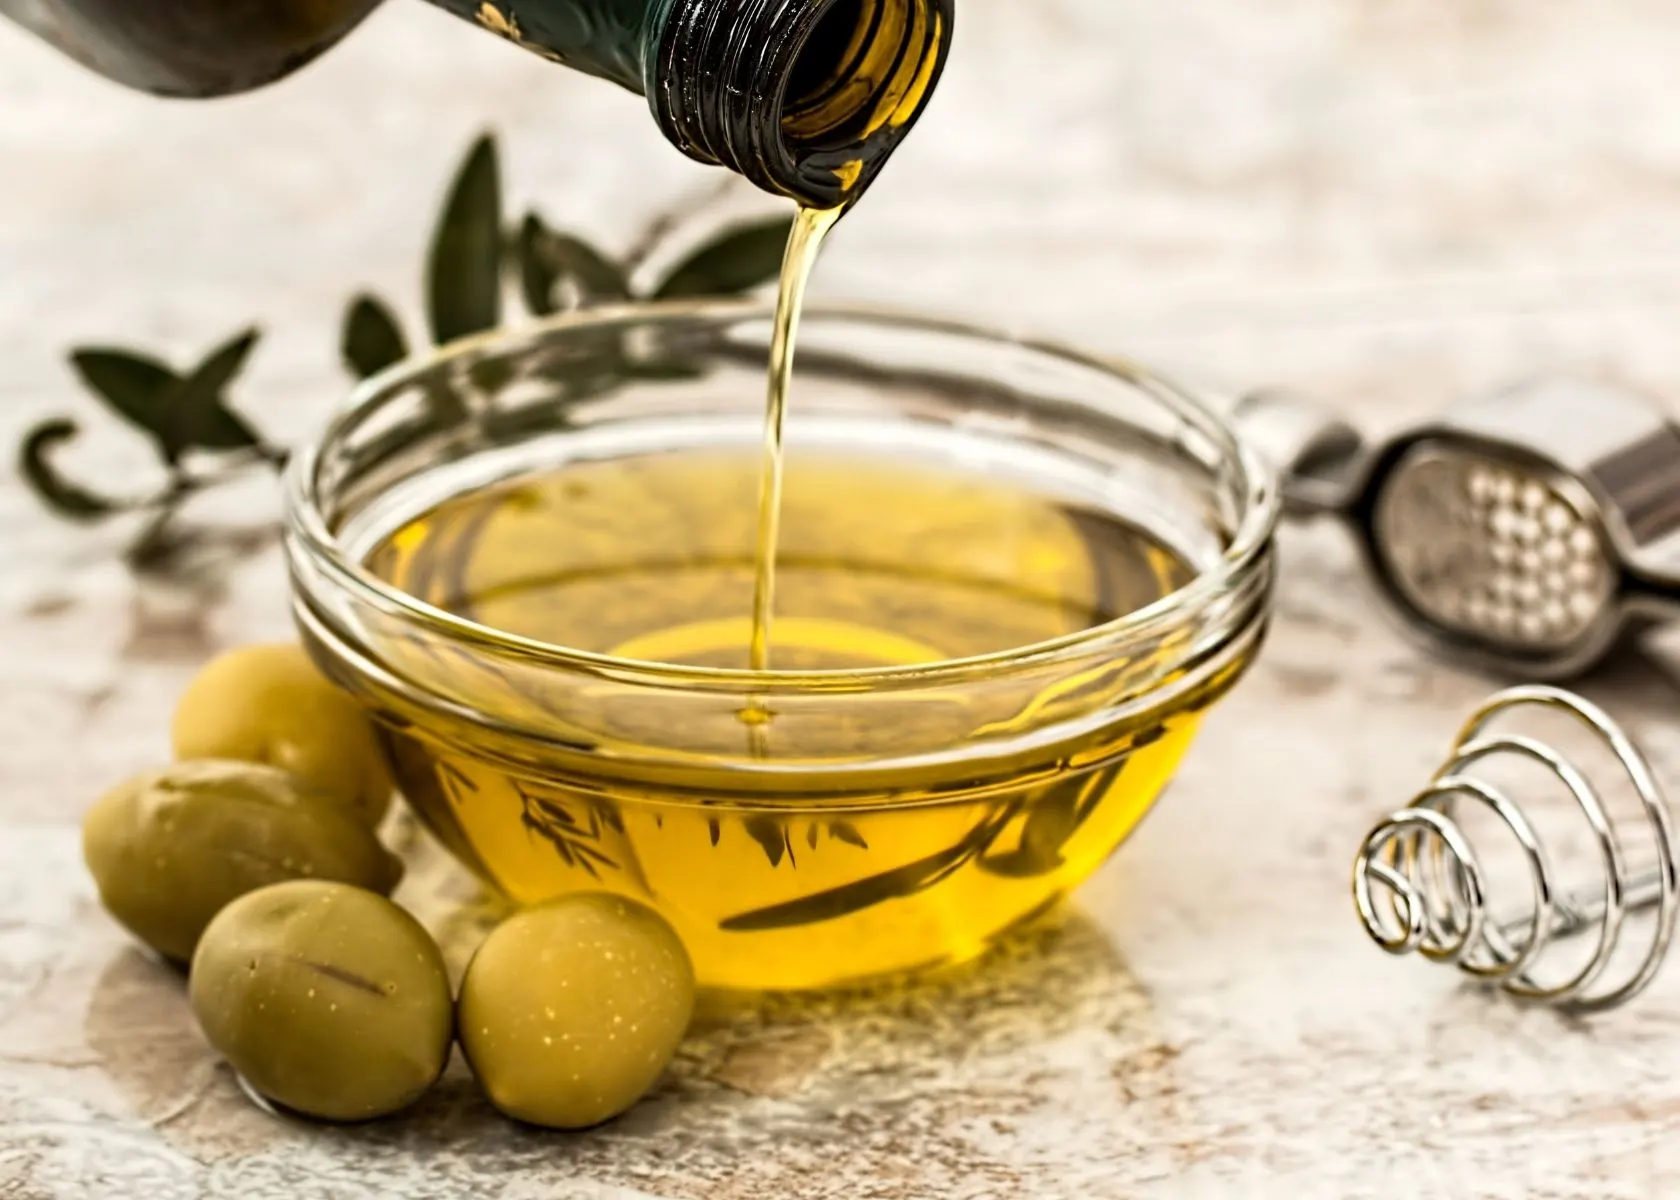 Olive oil is poured into small glass kitchen prep bowl next to fresh olives.